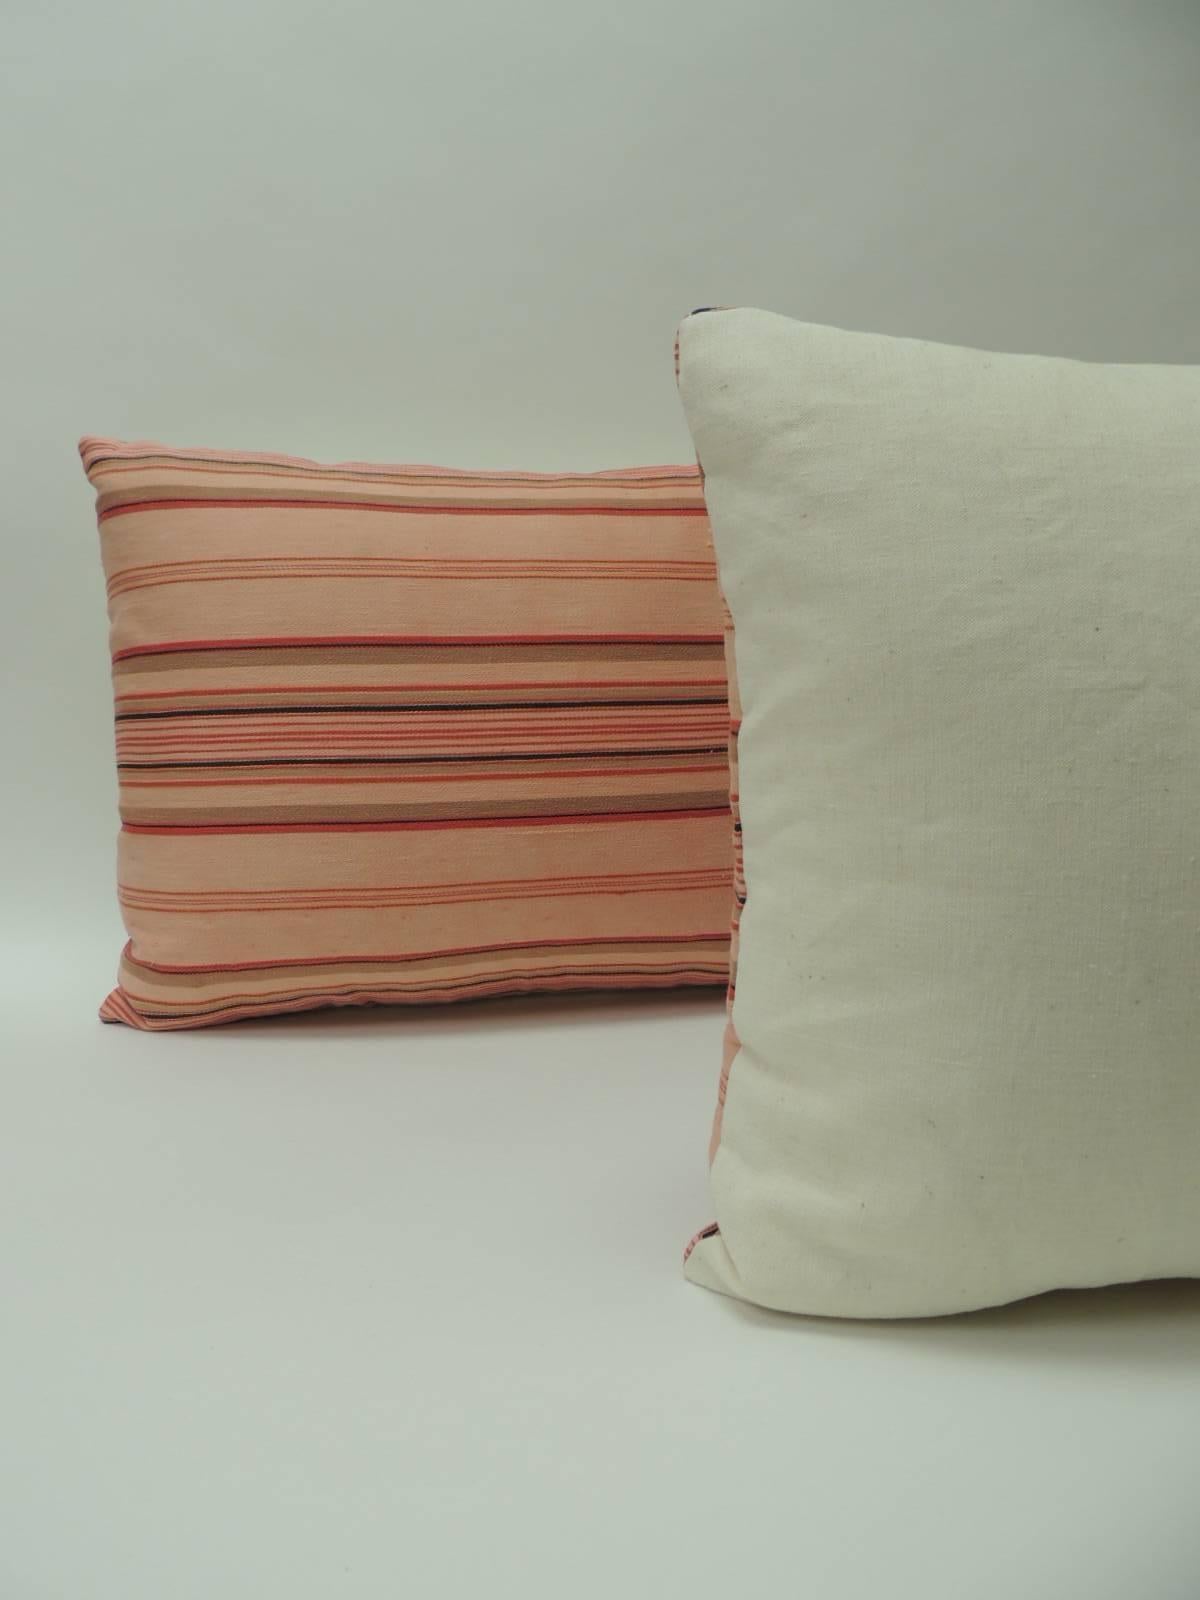 Hand-Crafted Pair of Vintage French Pink and Red Stripes Lumbar Decorative Pillows